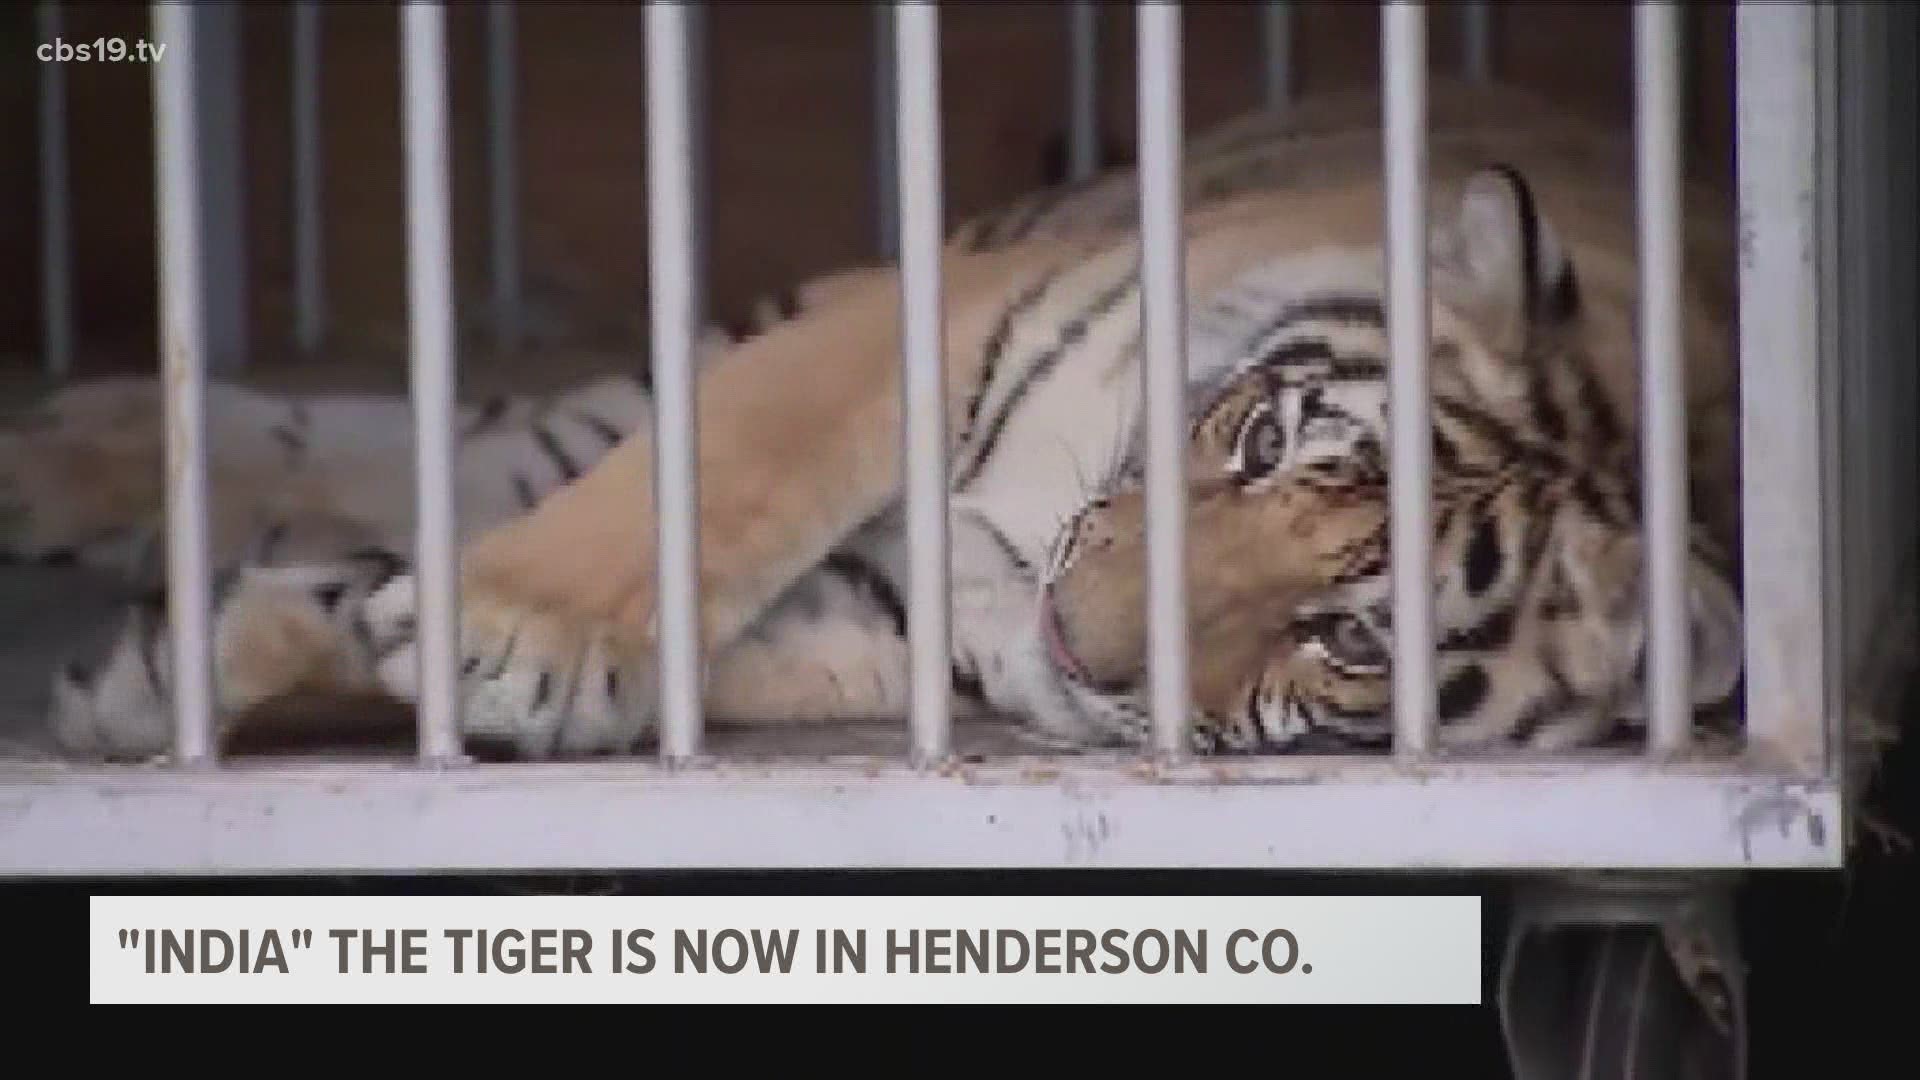 "India" the tiger is now in Henderson Co.